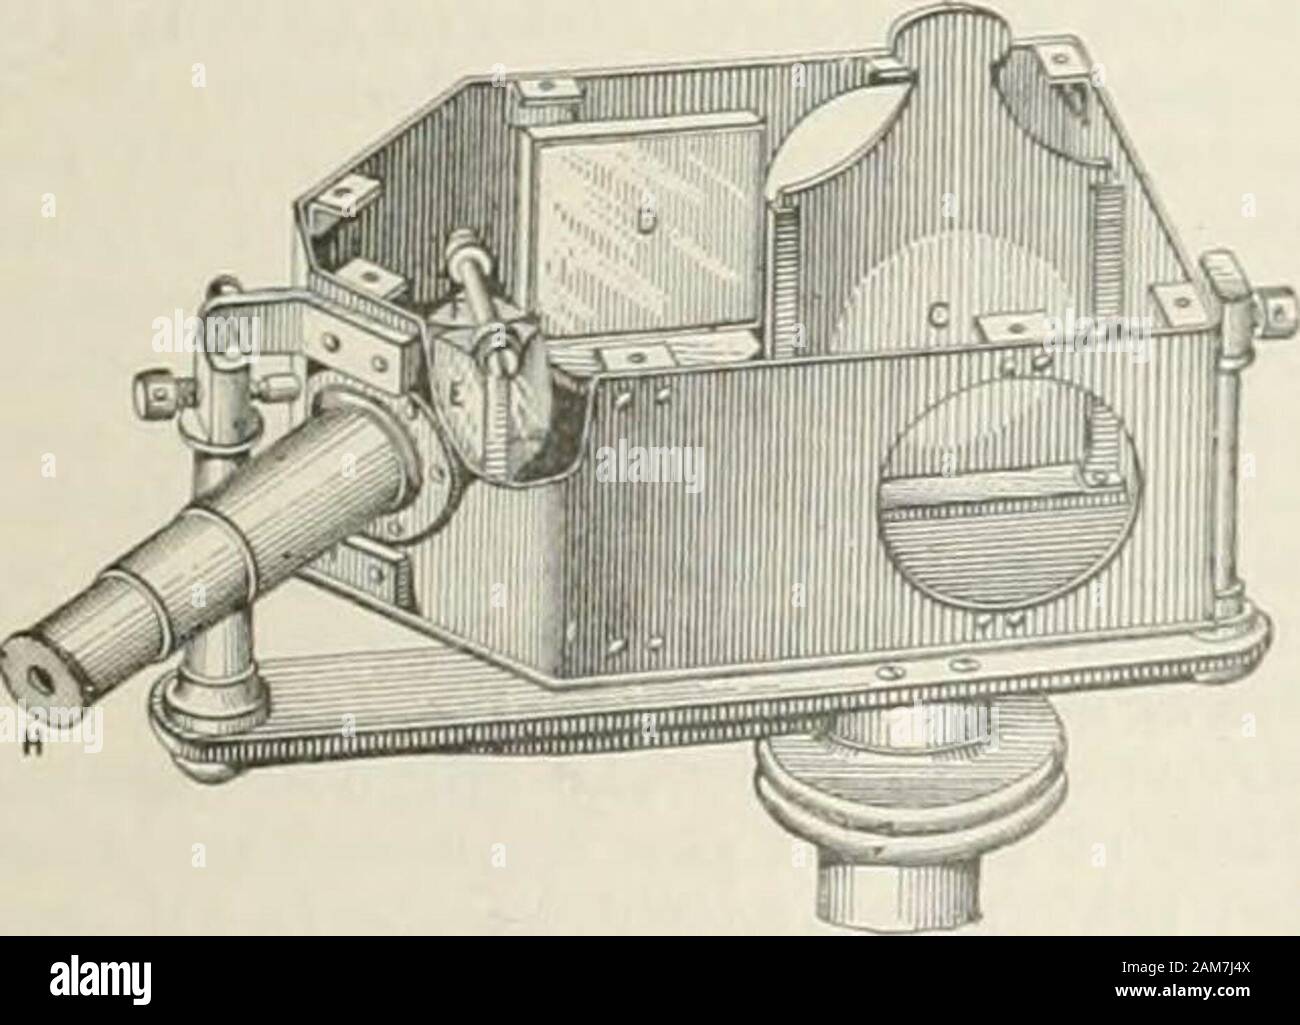 The new international encyclopaedia . Fig. LUMMER-BRODHrN PHOTOMETER ARRANGE the central portion (iZ), where the glasses arein contact. Therefore, only the rays passingthrough this central portion enter the secondprism, E, and produce a spot of light of ellipticalshape on its opposite surface. The rays fromthe other source of light. A, are reflected into. Fig. fi. LCMMER-BRODHUN PHOTOMETER. the prism E, and by total reflection at thehypothenuse are brought to the third face of theprism, except those falling on the surface of con-tact, whicli enter the prism F. Consequently wehave the surface o Stock Photo